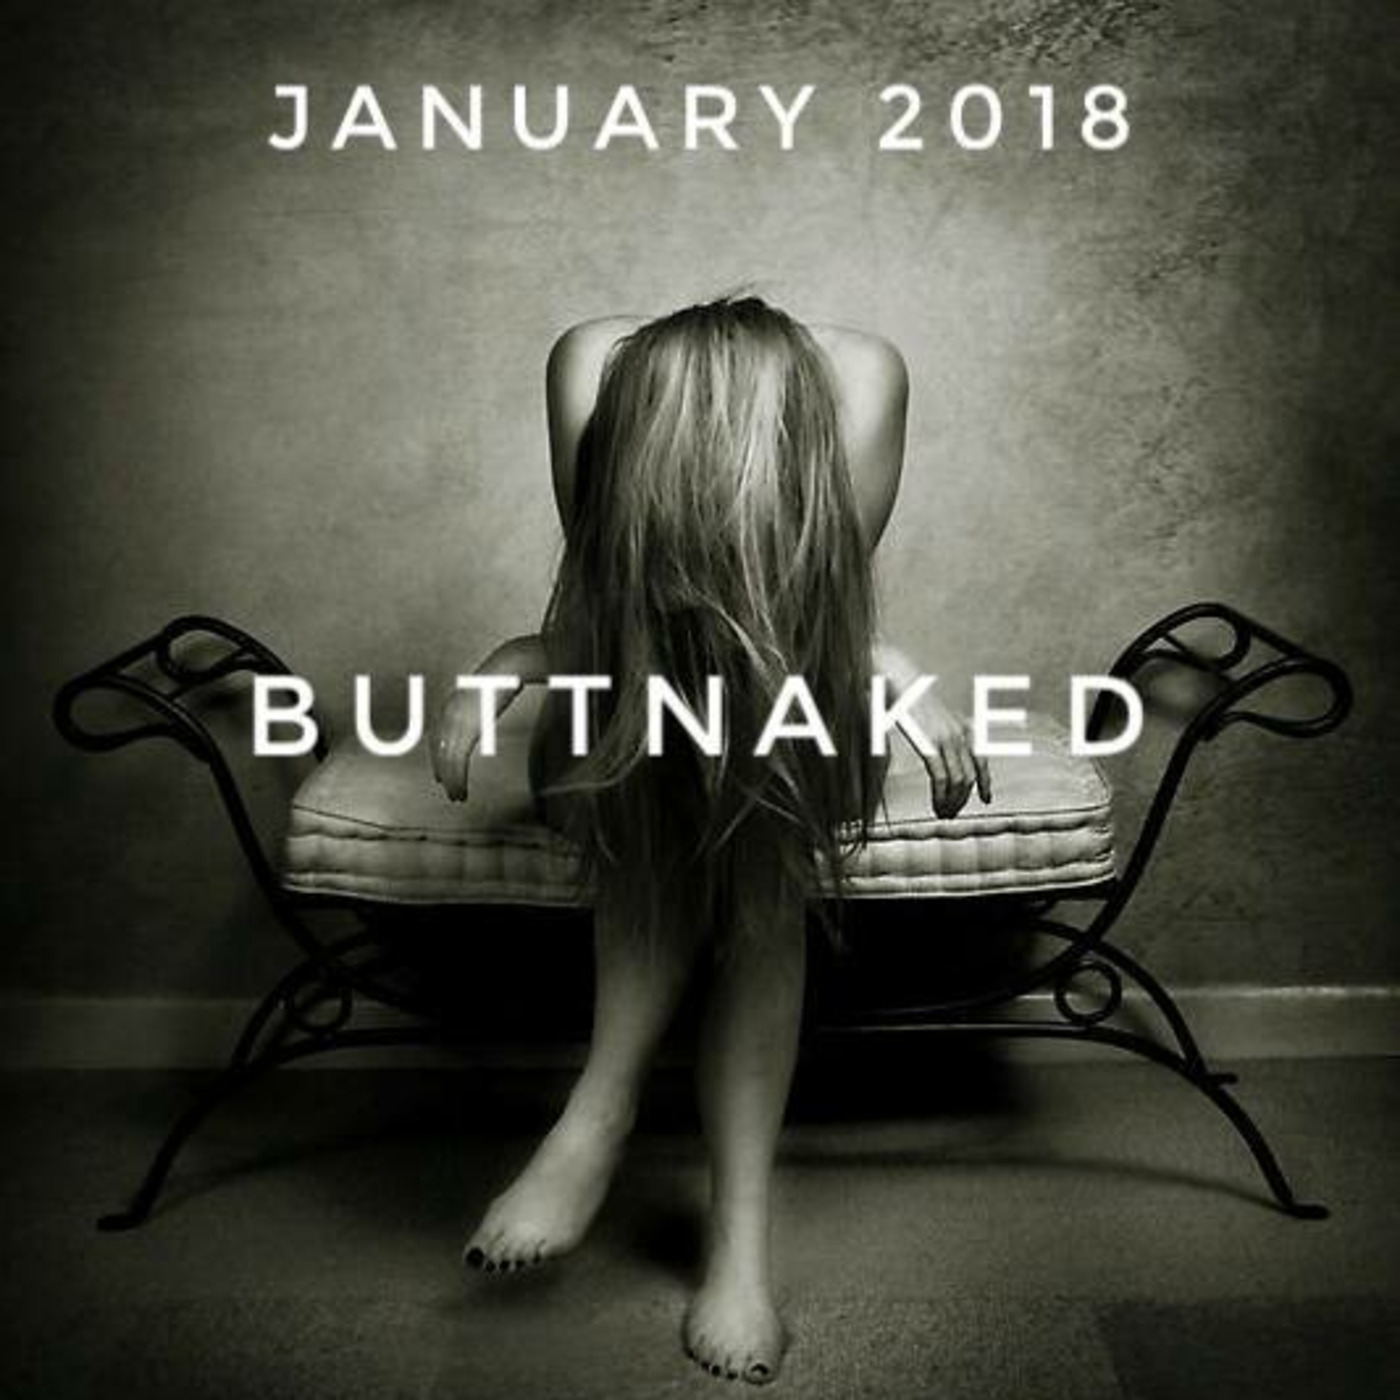 January 2018 - Iain Willis pres The Buttnaked Soulful House Sessions